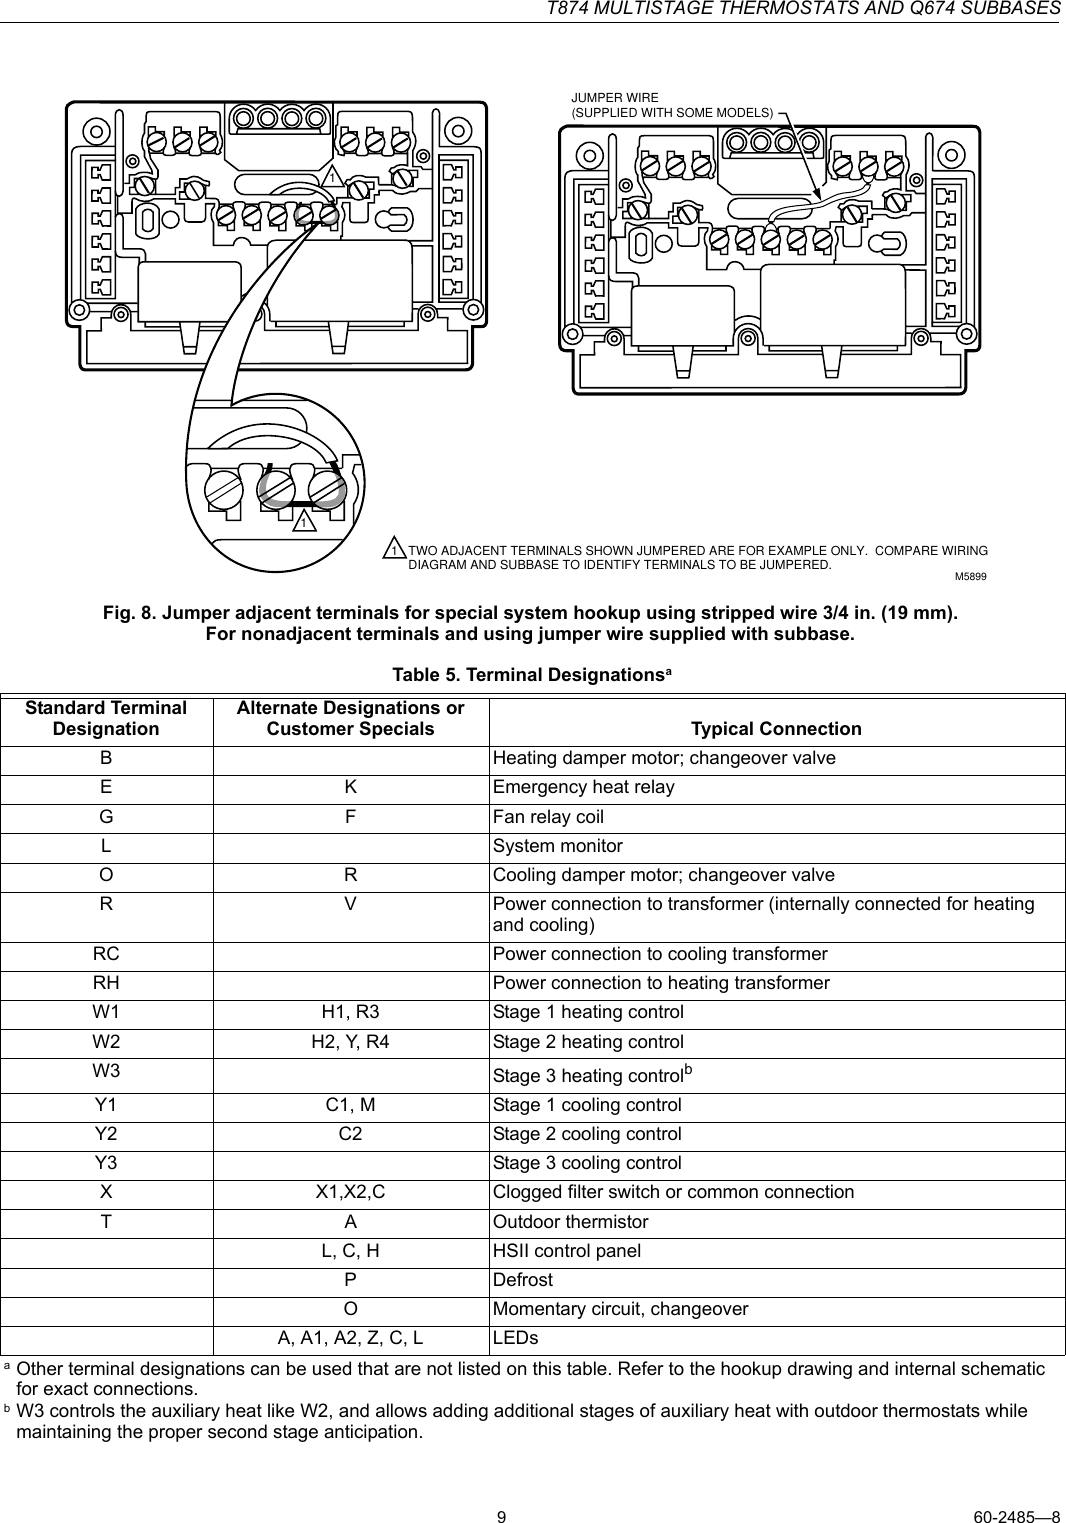 American Standard Thermostat G1675 Wiring Diagram - Wiring Diagram Networks